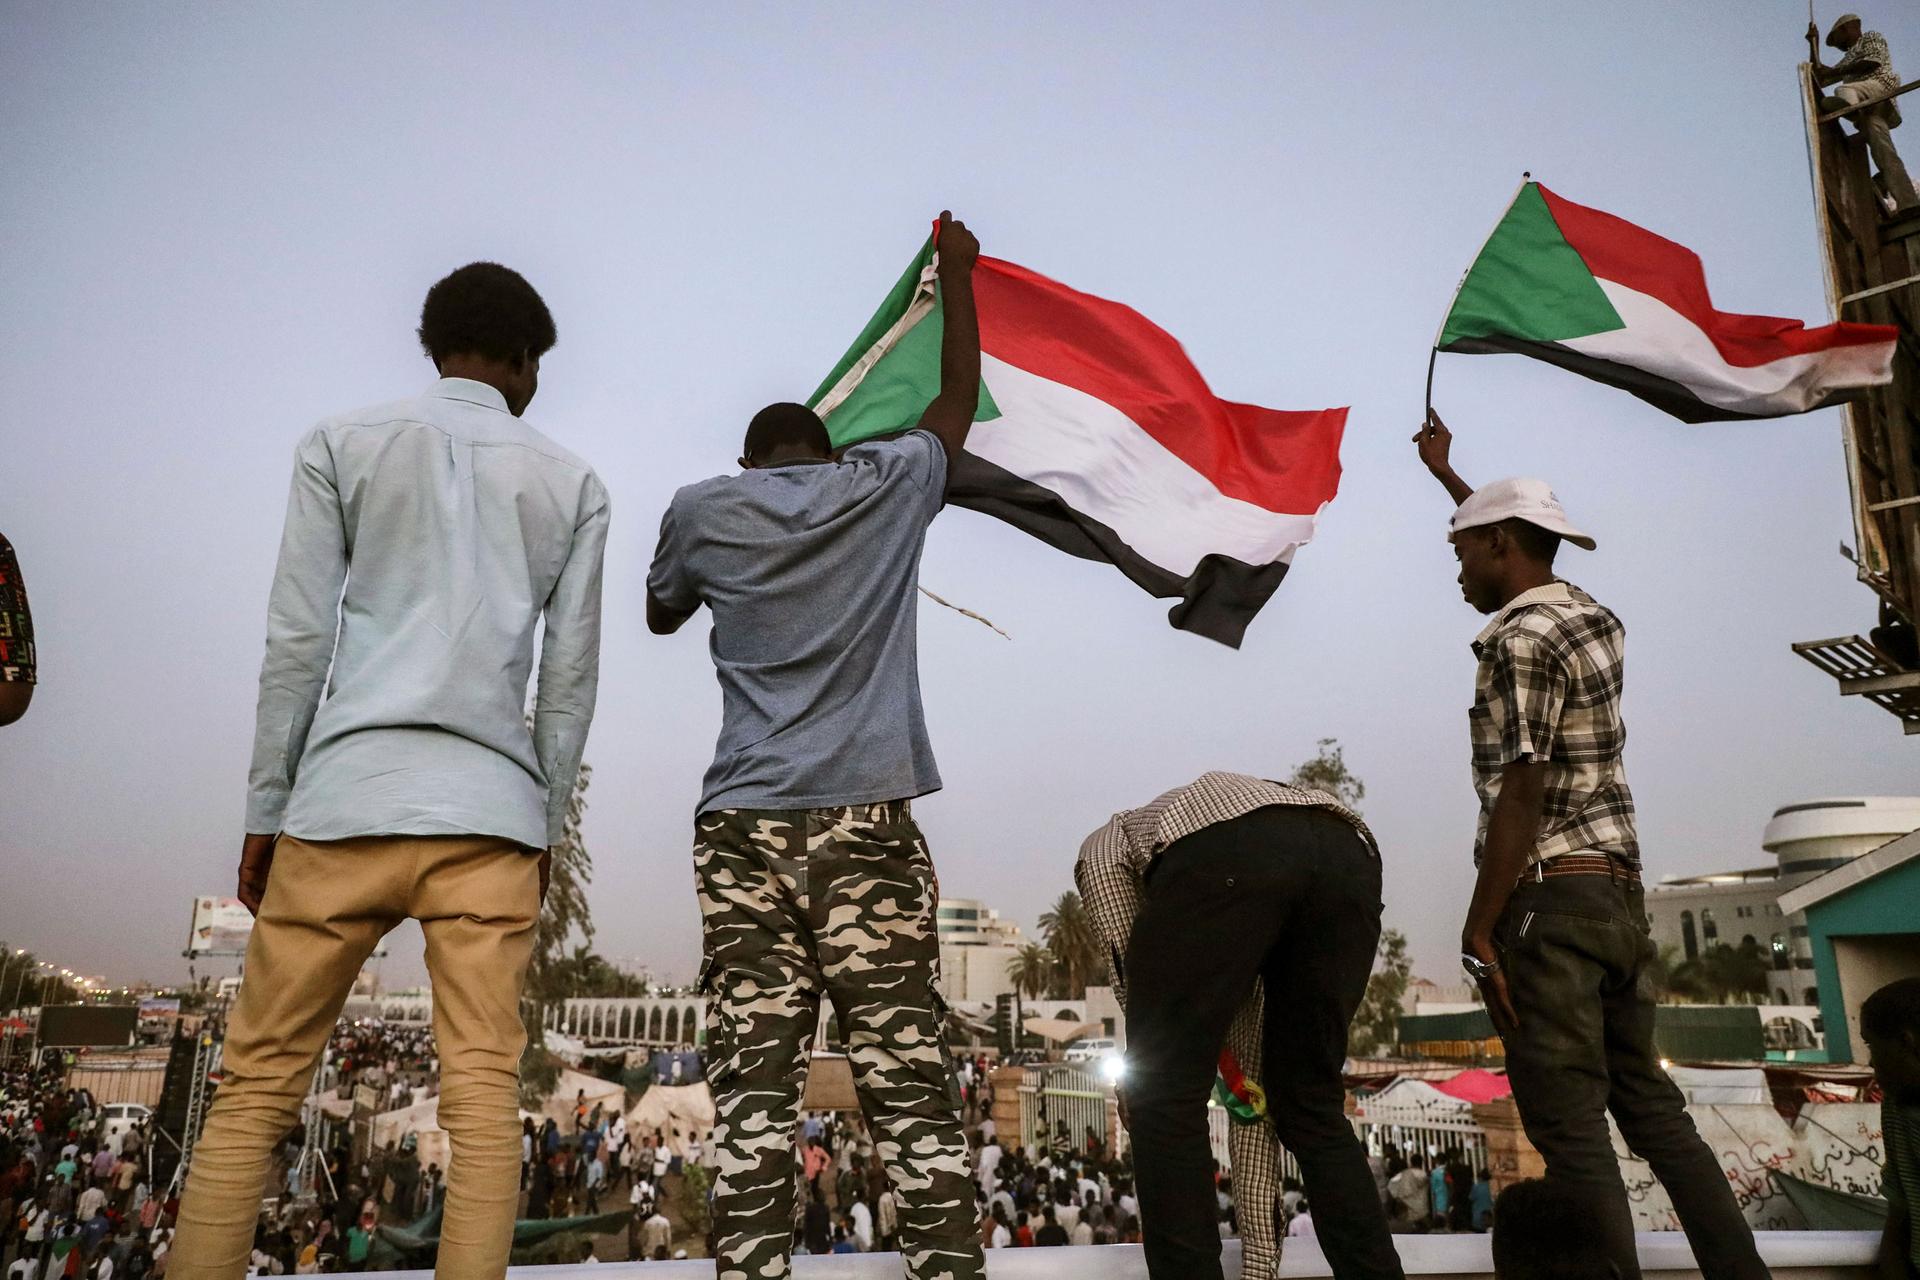 A group of four men are shown with two waving the Sudanese national flag.